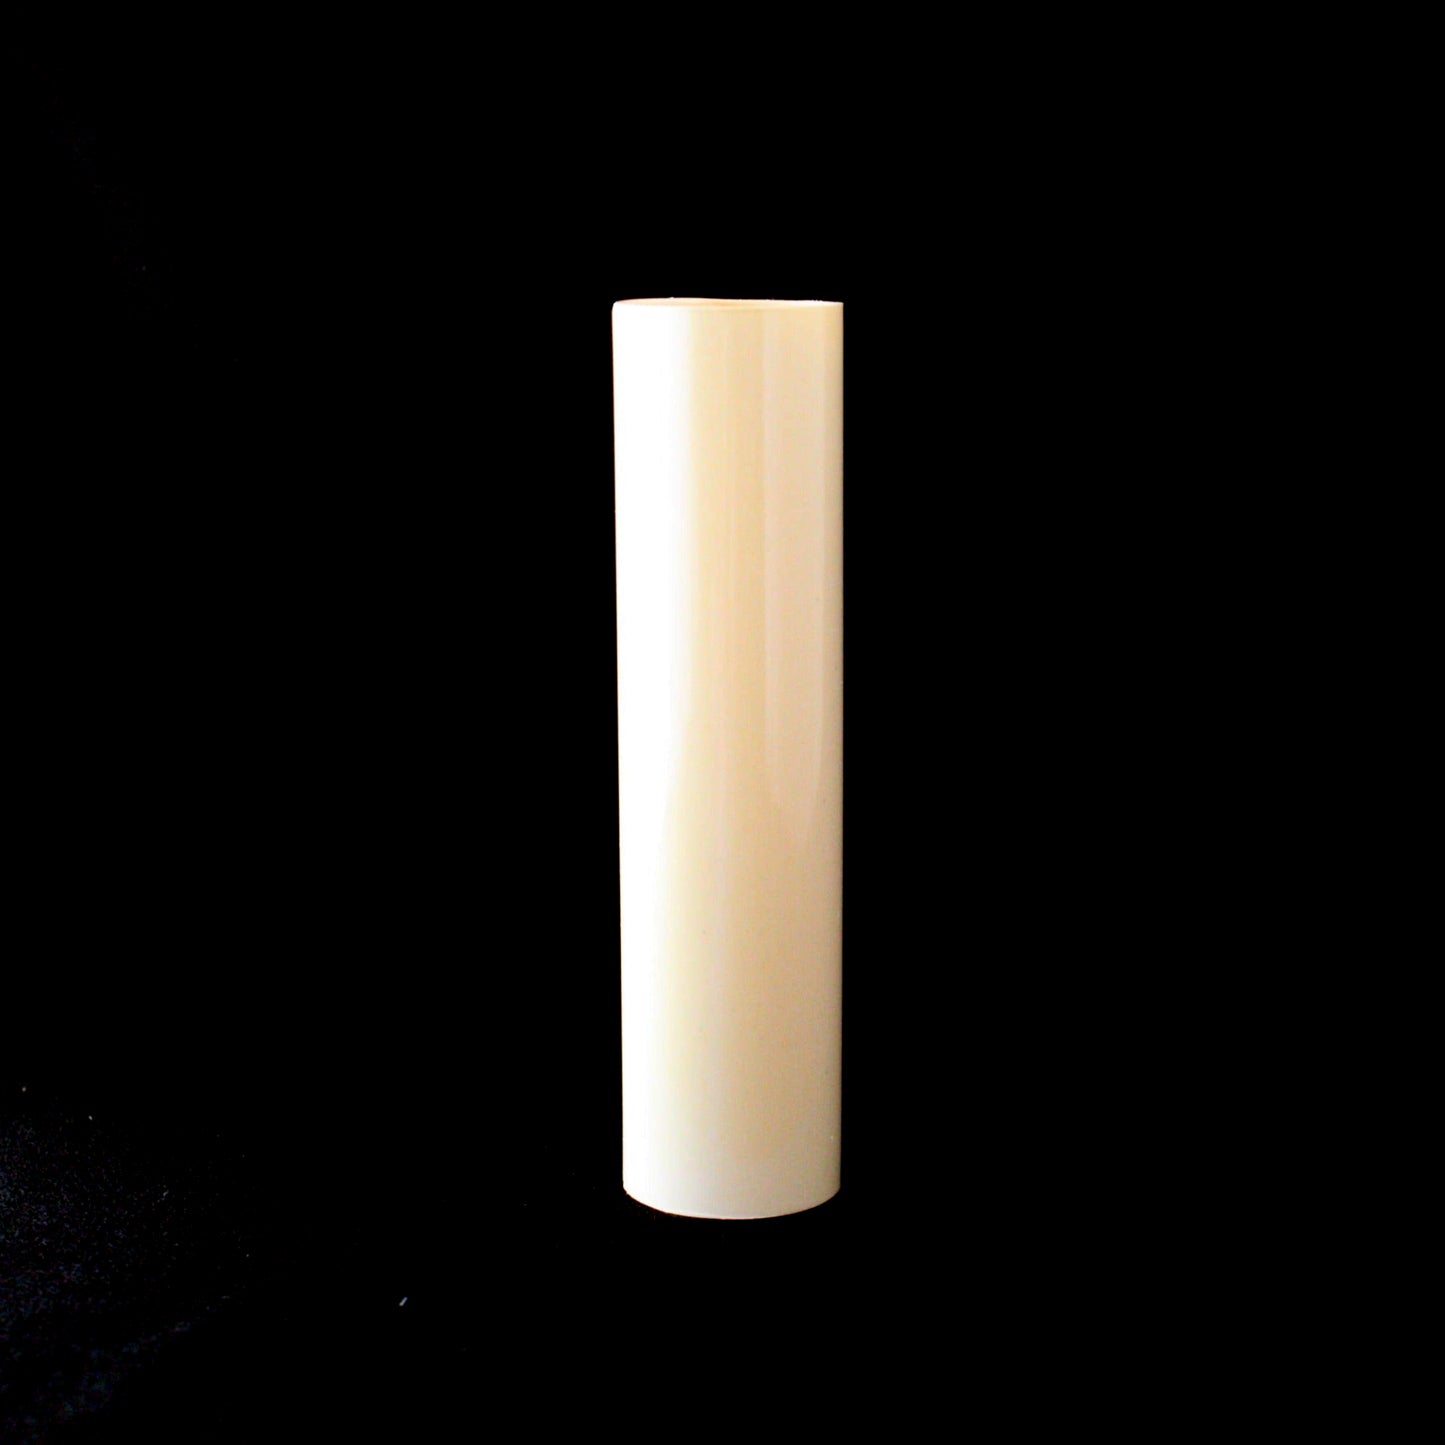 Antique Plastic Candle Cover, Medium Base (Pack of 6)